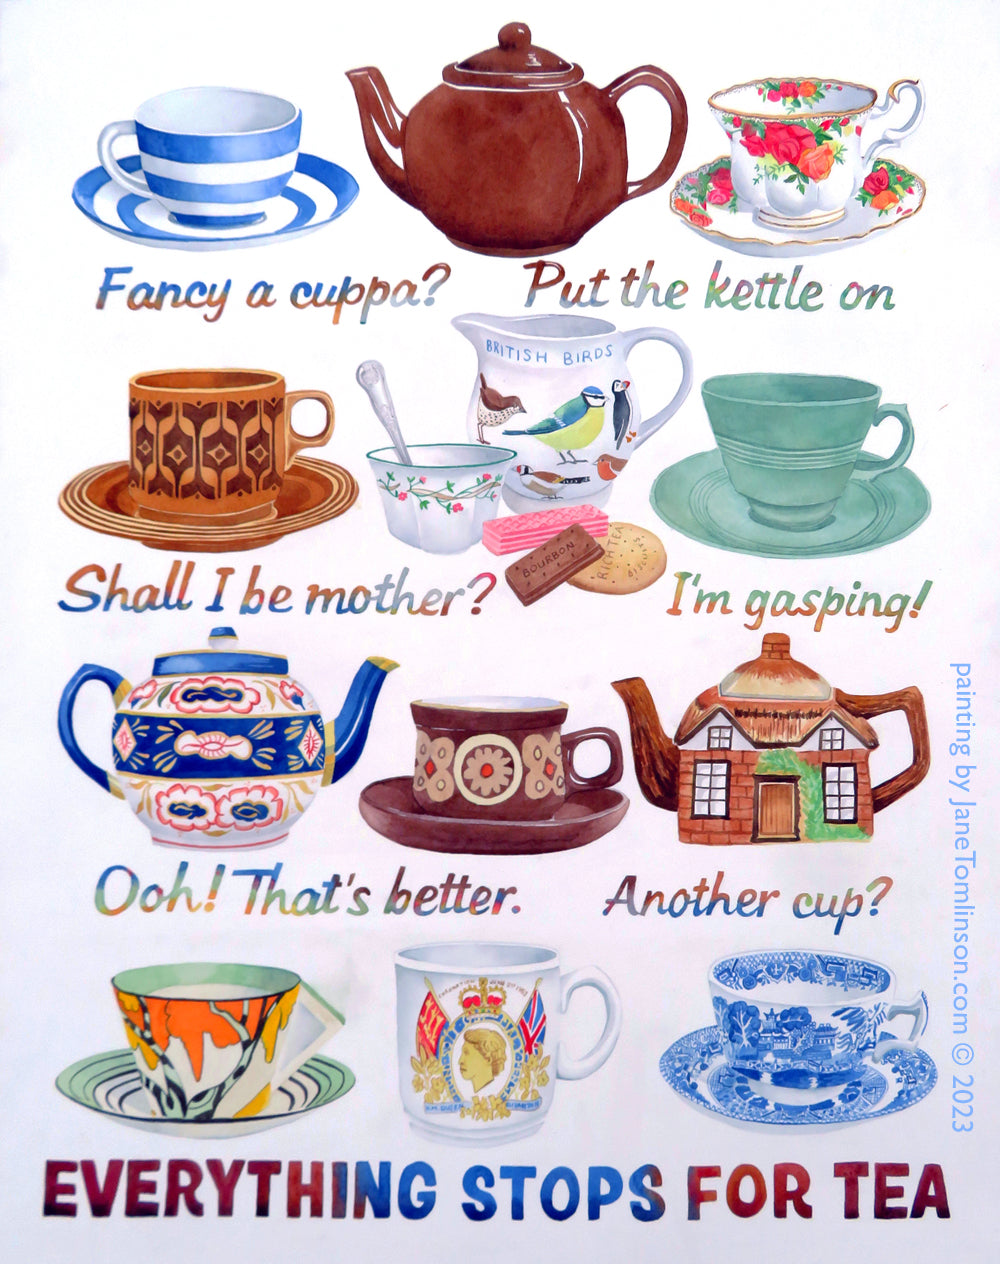 Everything stops for tea - a painting of vintage crockery